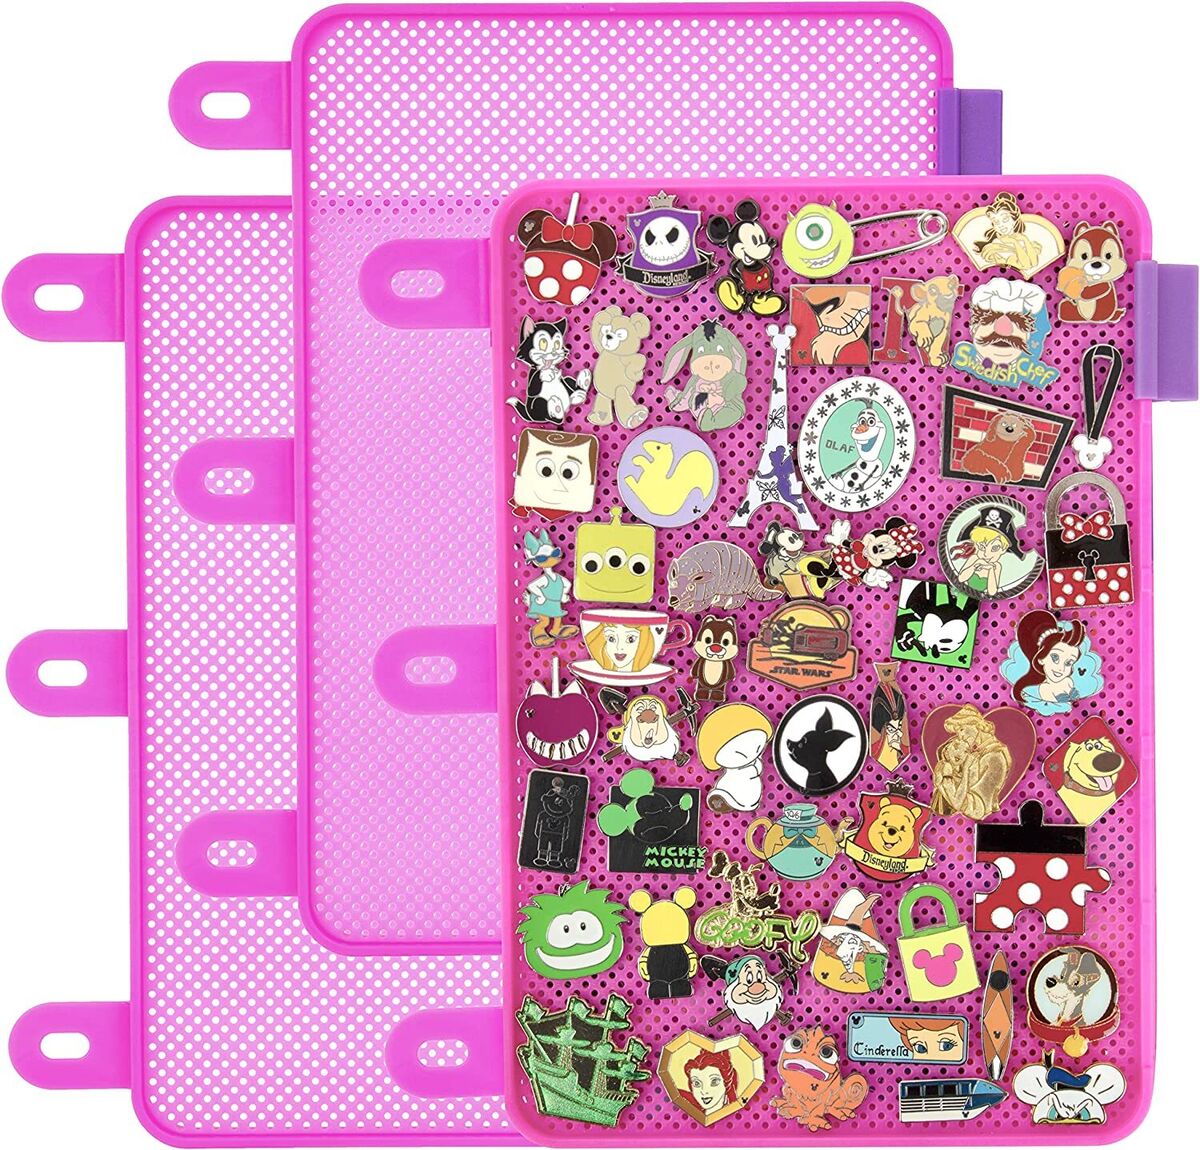 Enamel Pin Display Pages (3 PK) - Display and Trade Your Disney Collectible Pins in Any 3-Ring Binder - Pages Lay Flat with Pinbacks and No Sagging!